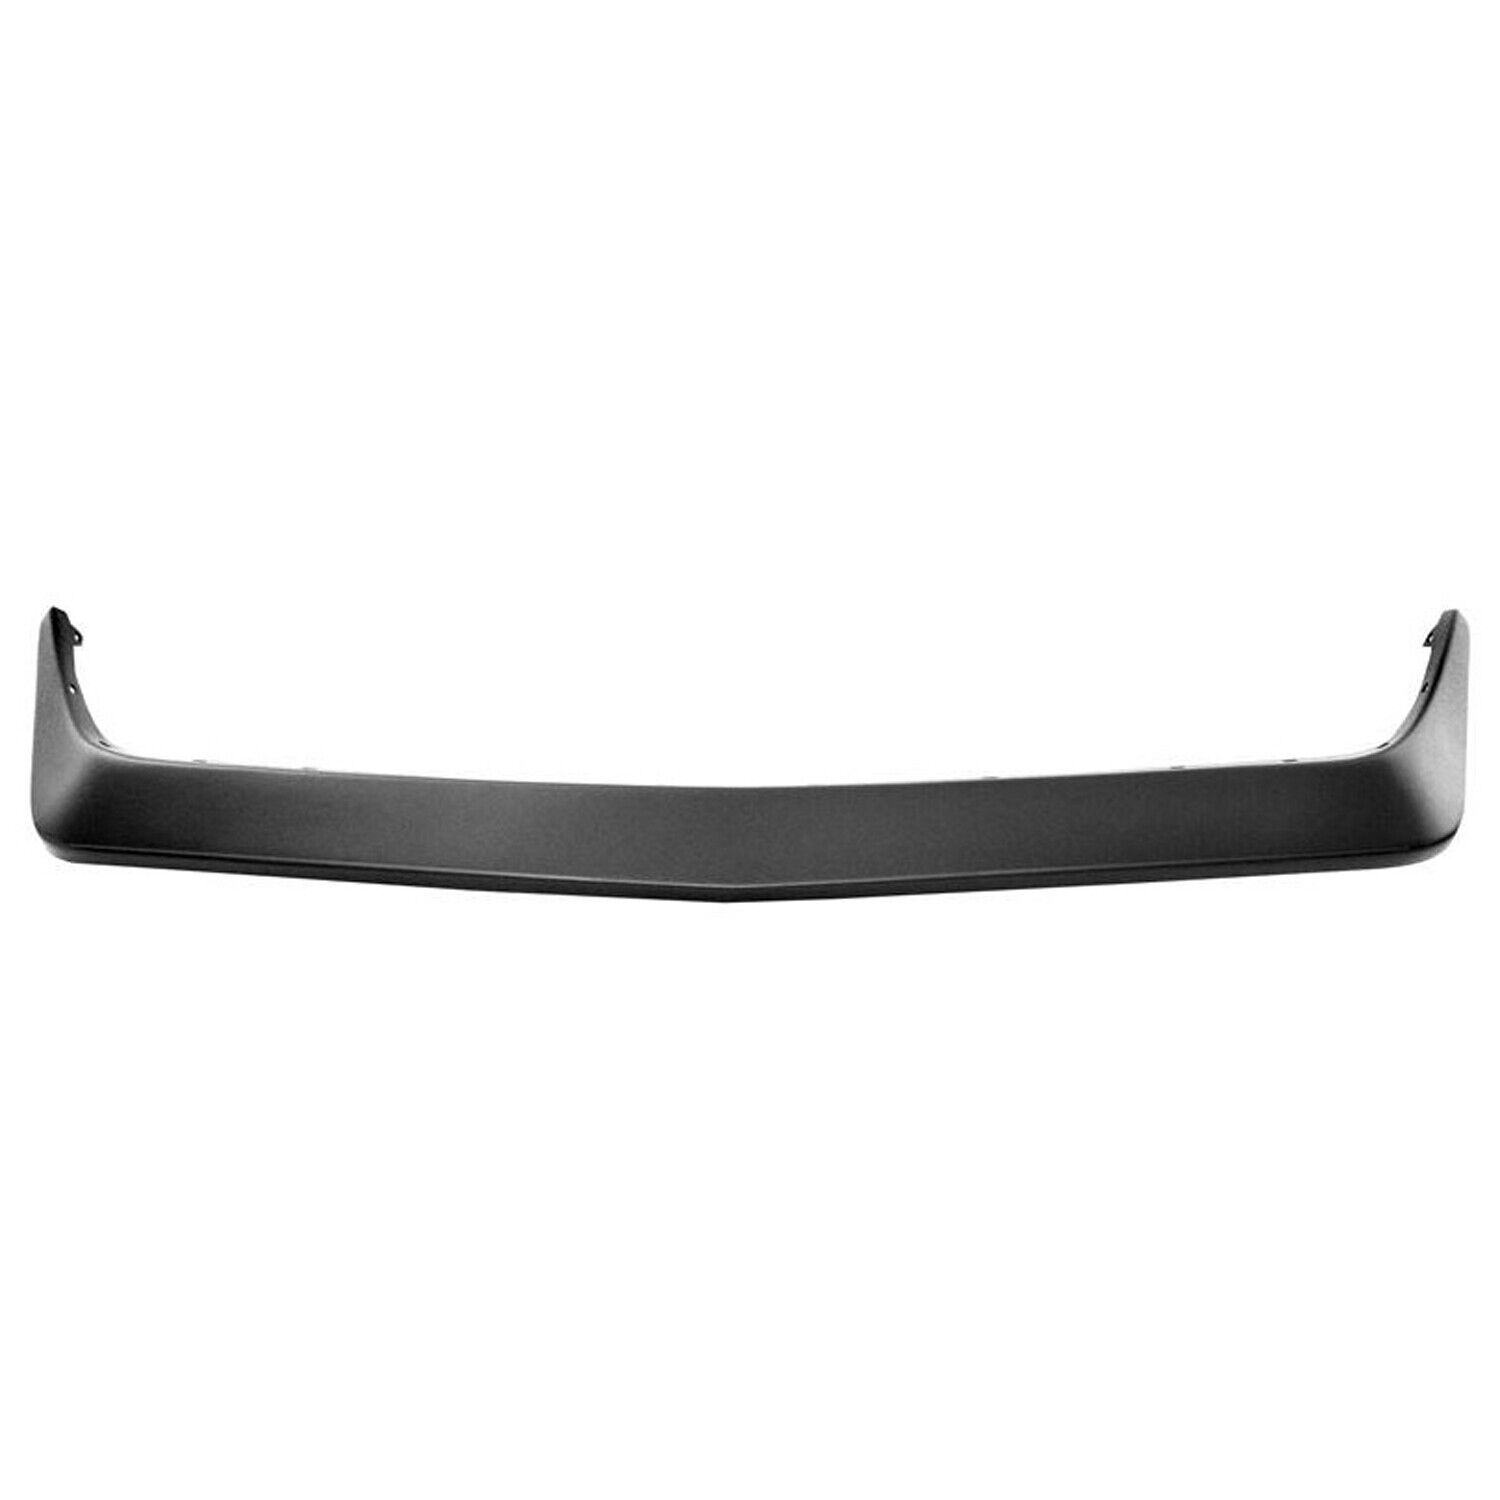 Replacement Front Bumper Spoiler fits 1971-1973 Ford Mustang Mach 1 3023-035-71